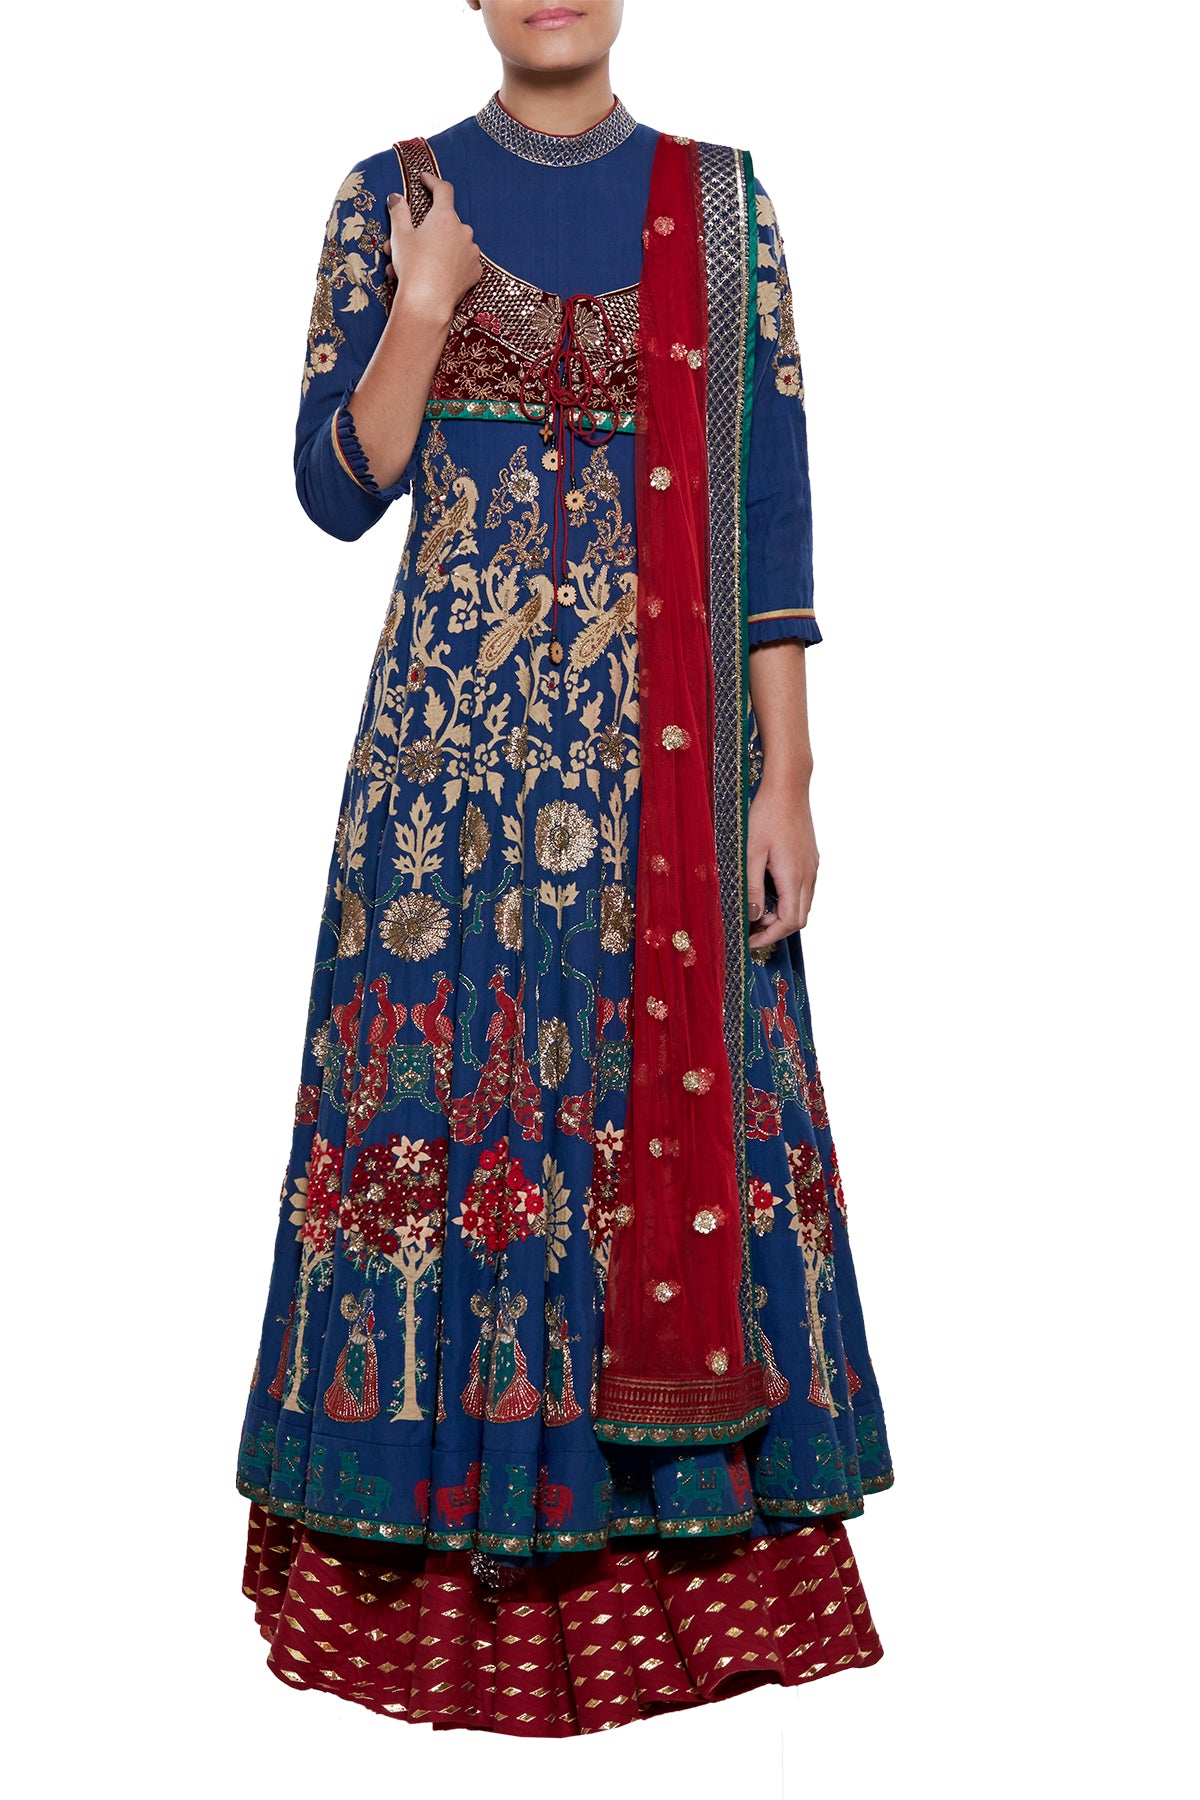 Reeking of royalty in a riveting blue & maroon medley, this gota lehenga skirt in net is paired to perfection with its appliqu‚Äö√†√∂‚àö√¢¬¨¬®¬¨¬© blue top. The ensemble is completed with its net embroidered dupatta and short zardosi jacket.